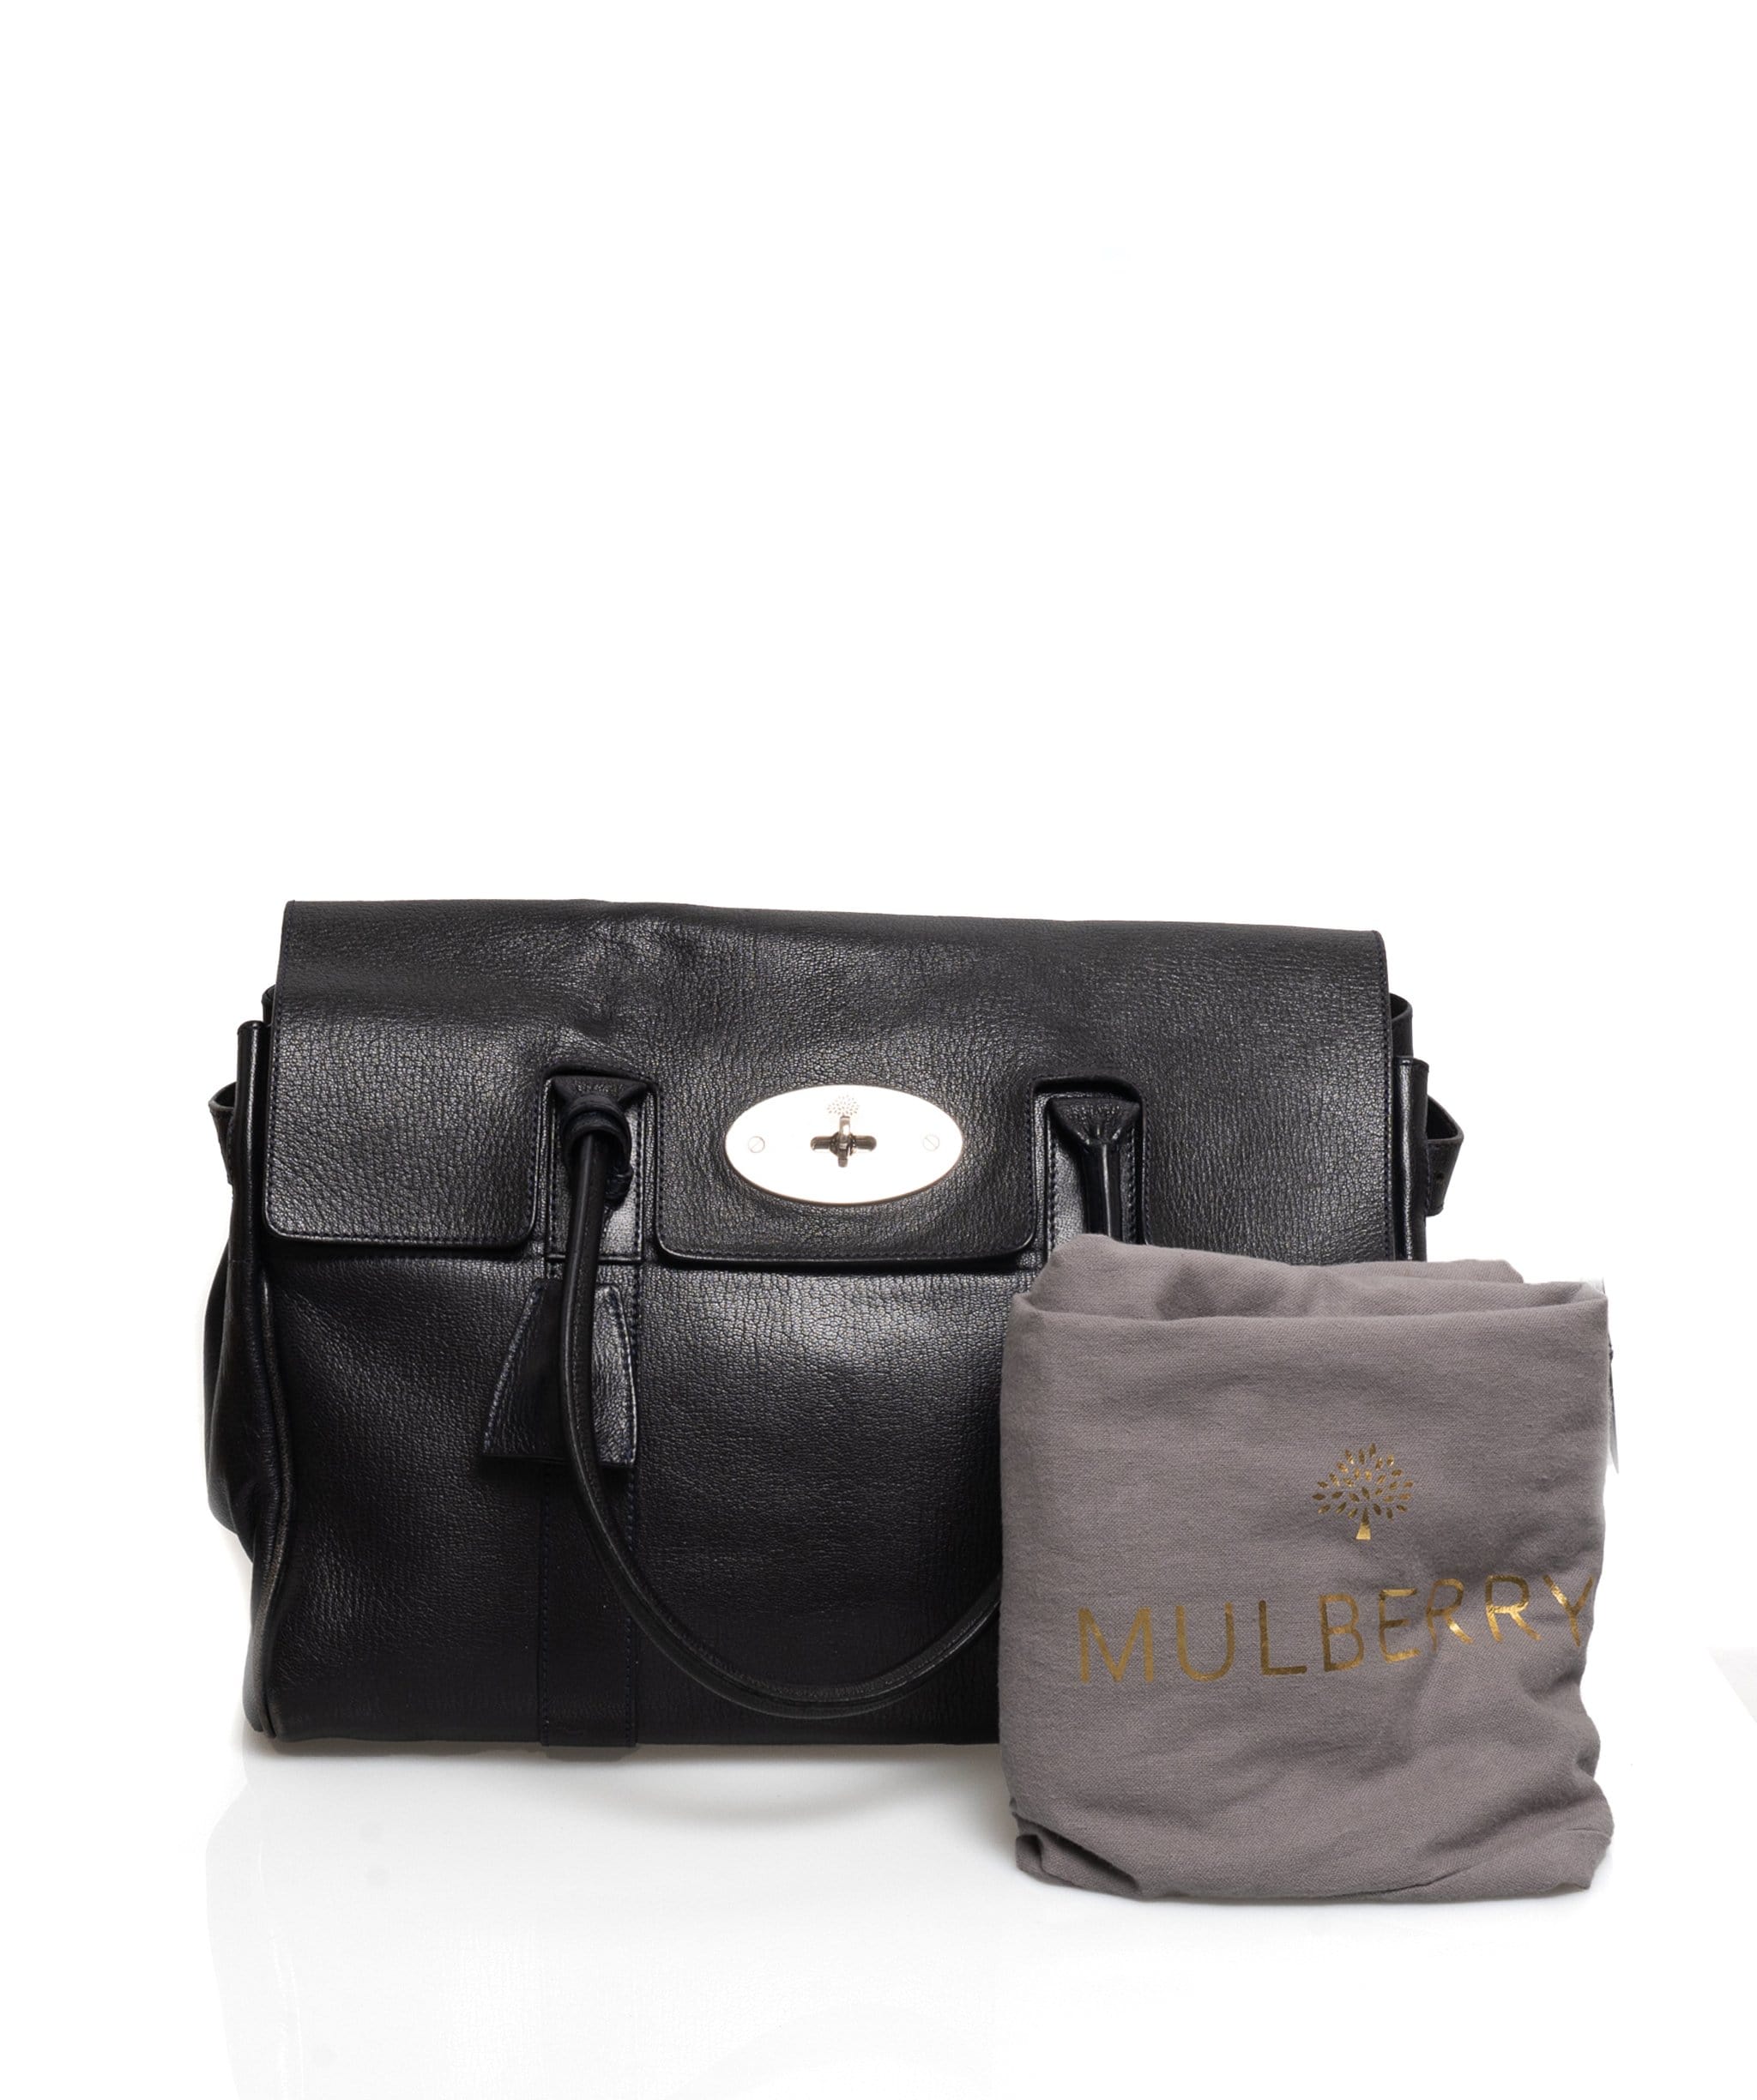 Mulberry Mulberry Bayswater Black Bag - ADL1415